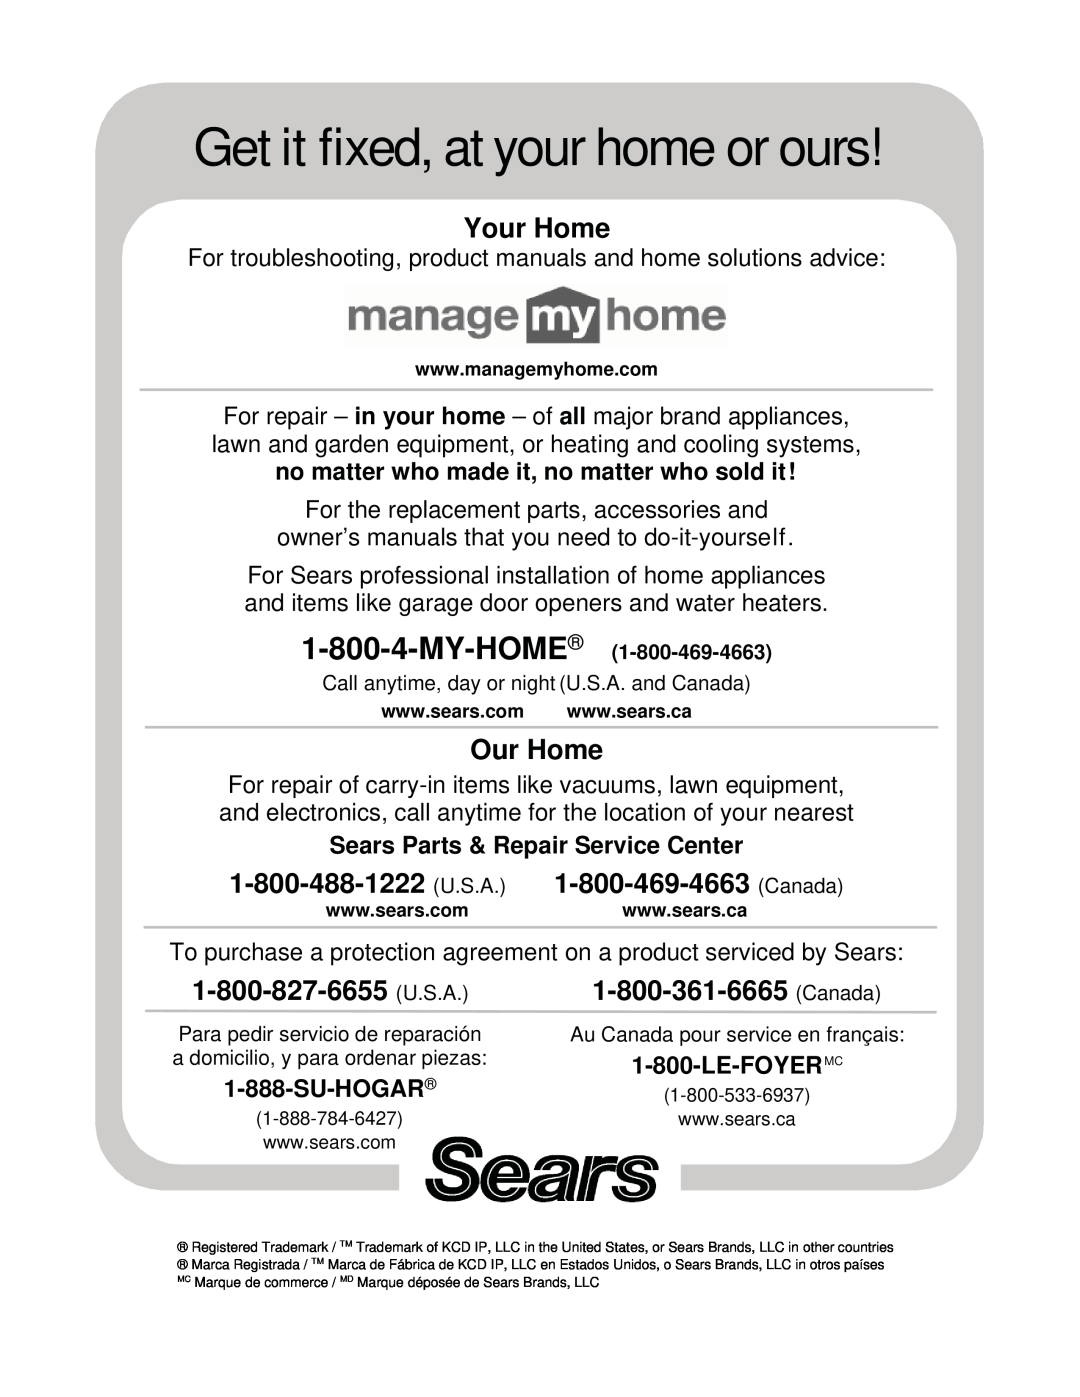 Kenmore 587.15412100A Get it fixed, at your home or ours, Your Home, Our Home, Canada, Sears Parts & Repair Service Center 